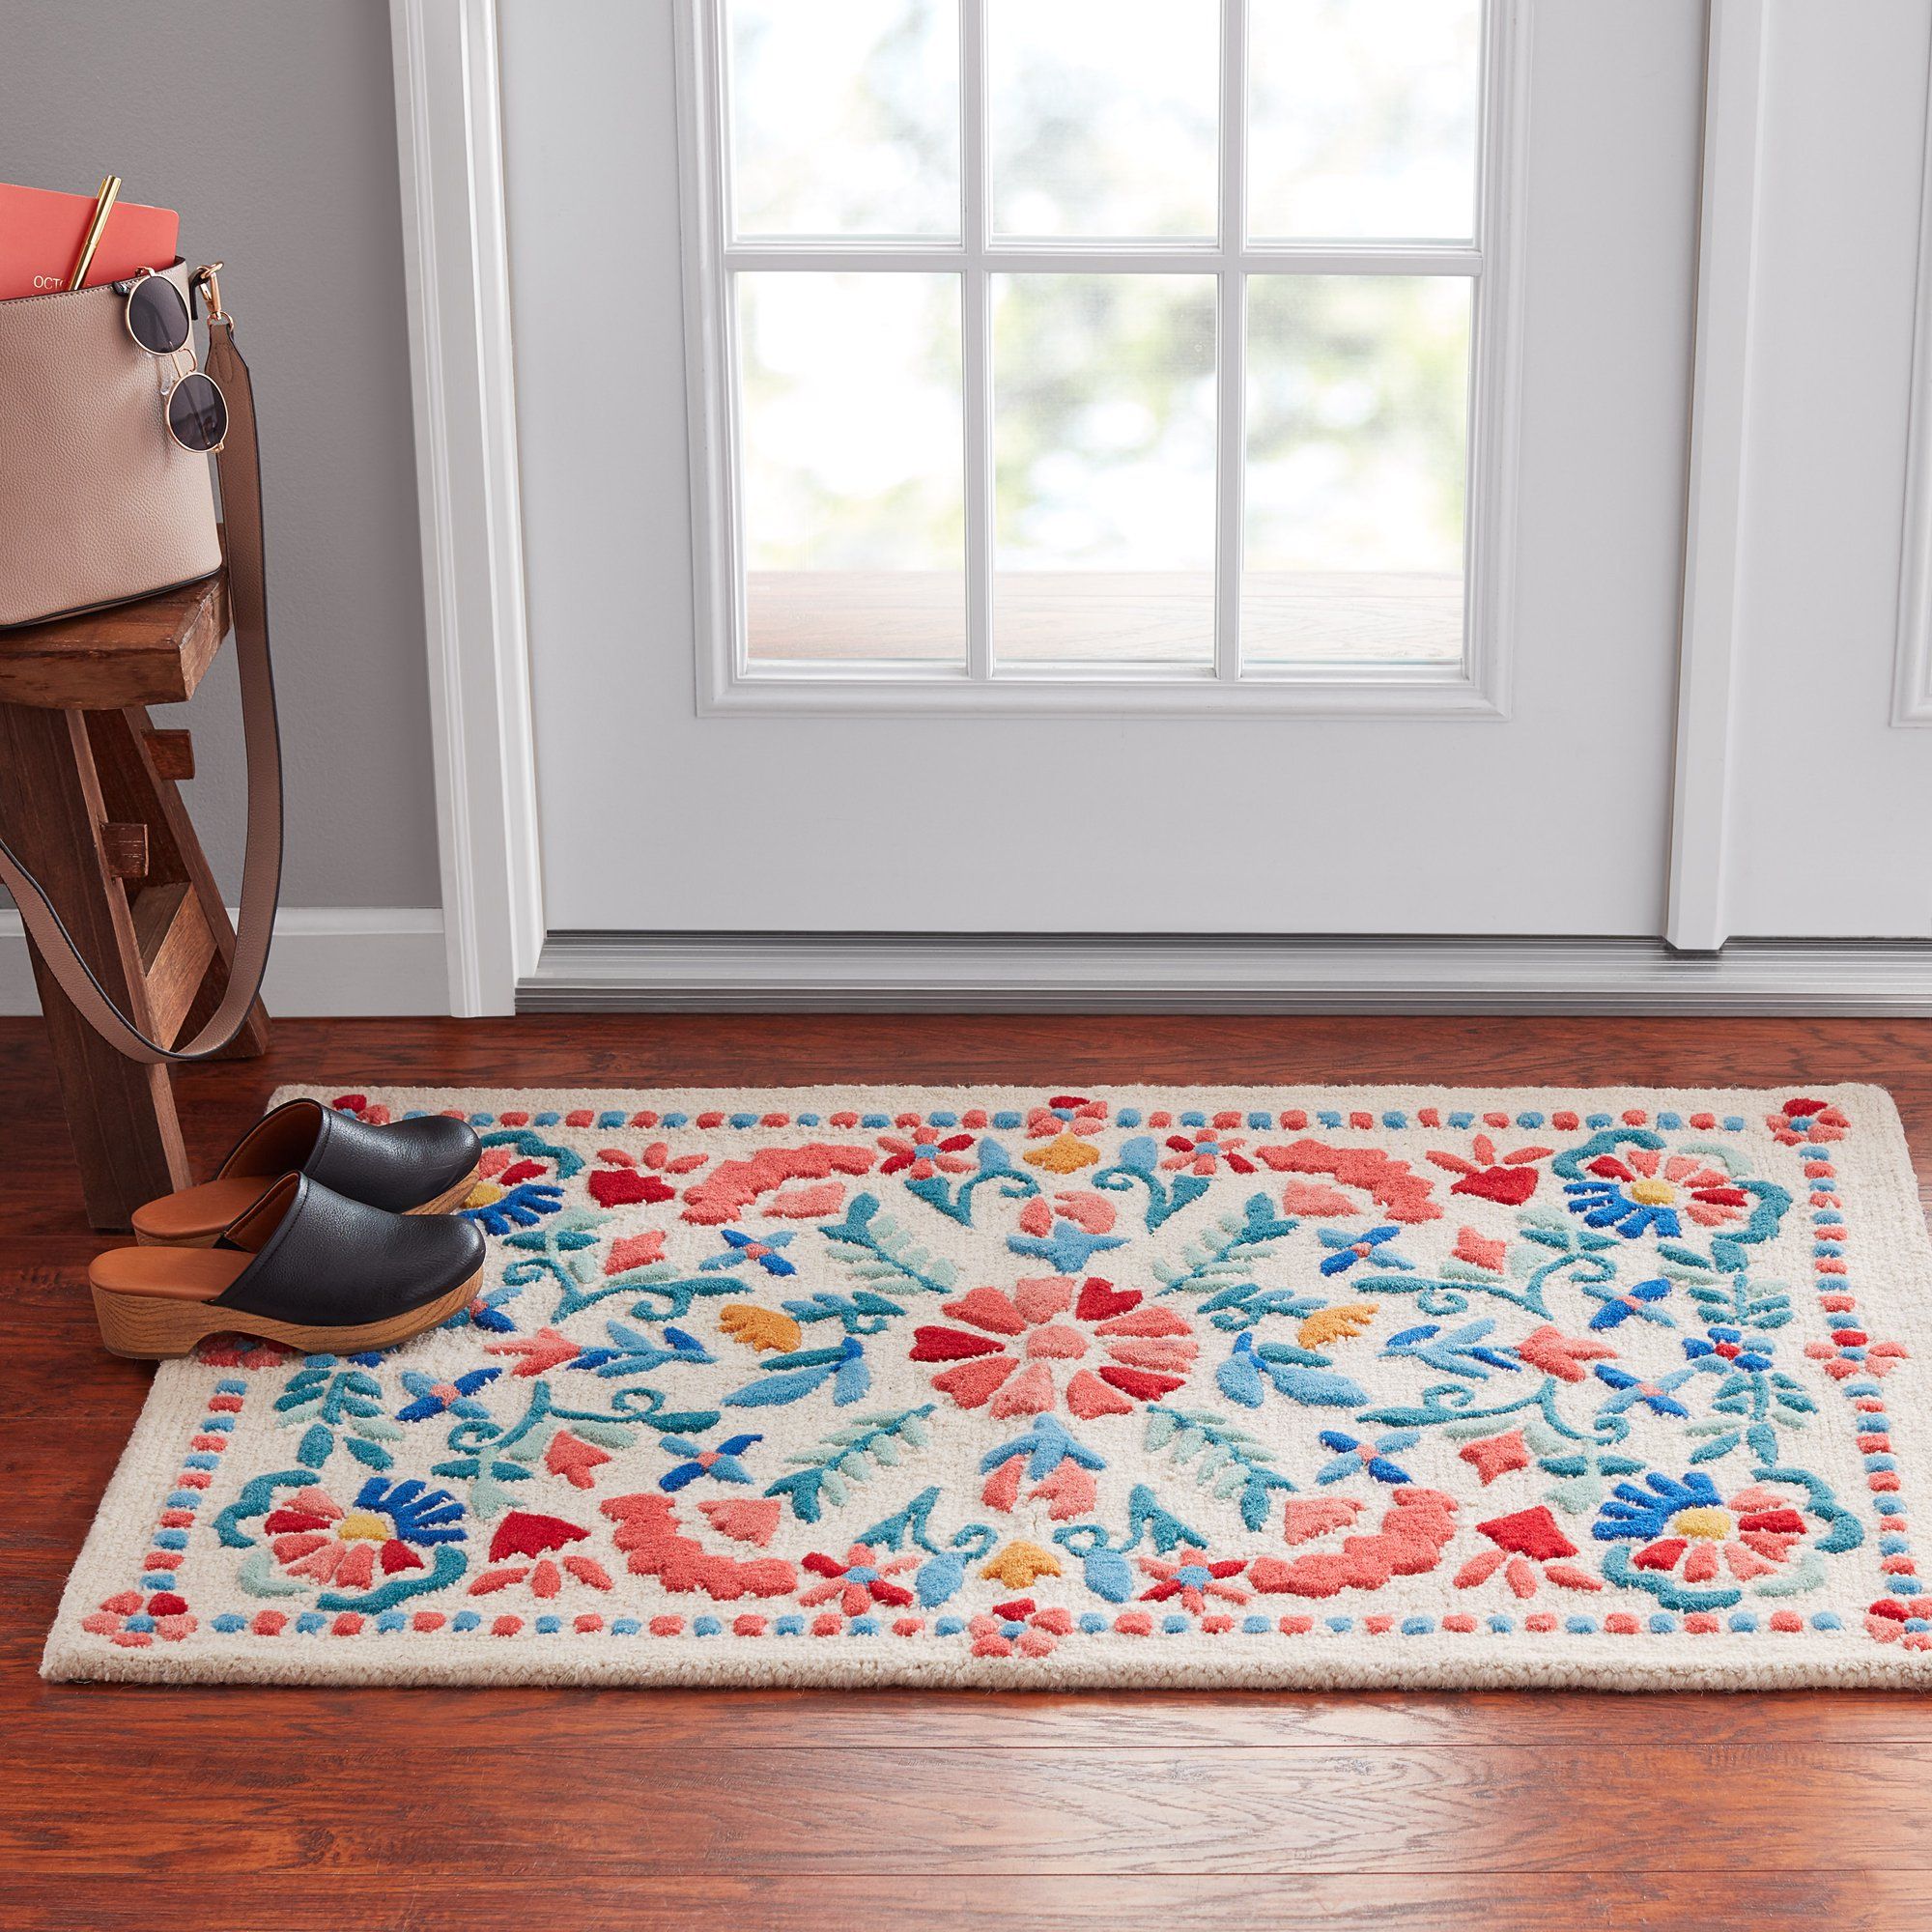 The Pioneer Woman Area Rugs at Walmart - Where to Buy Ree Drummond's Accent  Rugs